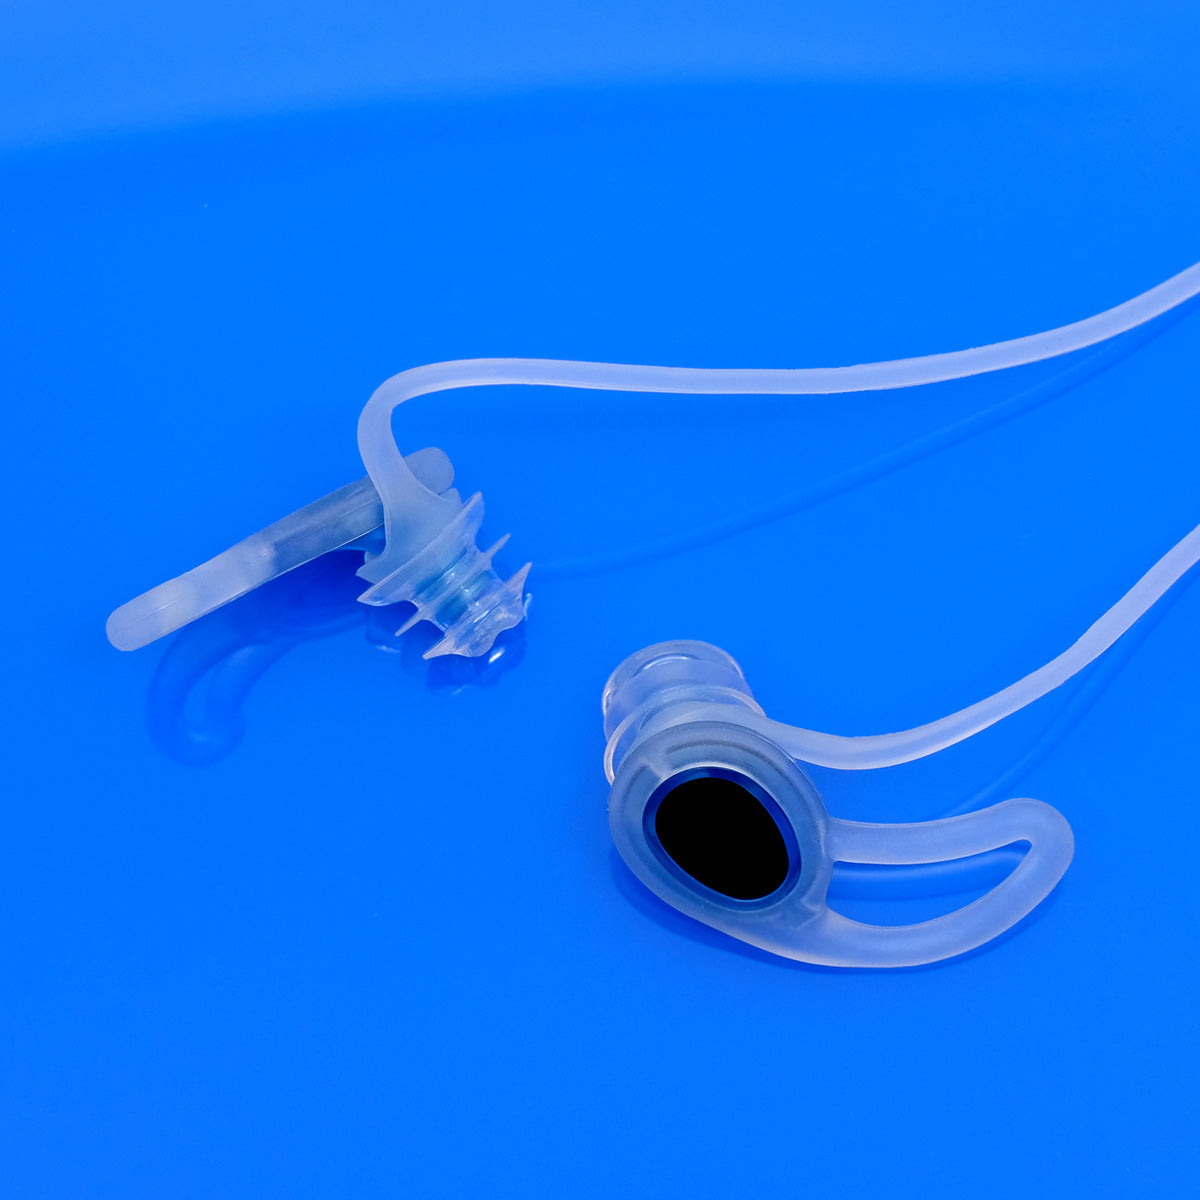 ADV. Eartune Aqua Universal Ear Plugs for Swimmers and Surfers